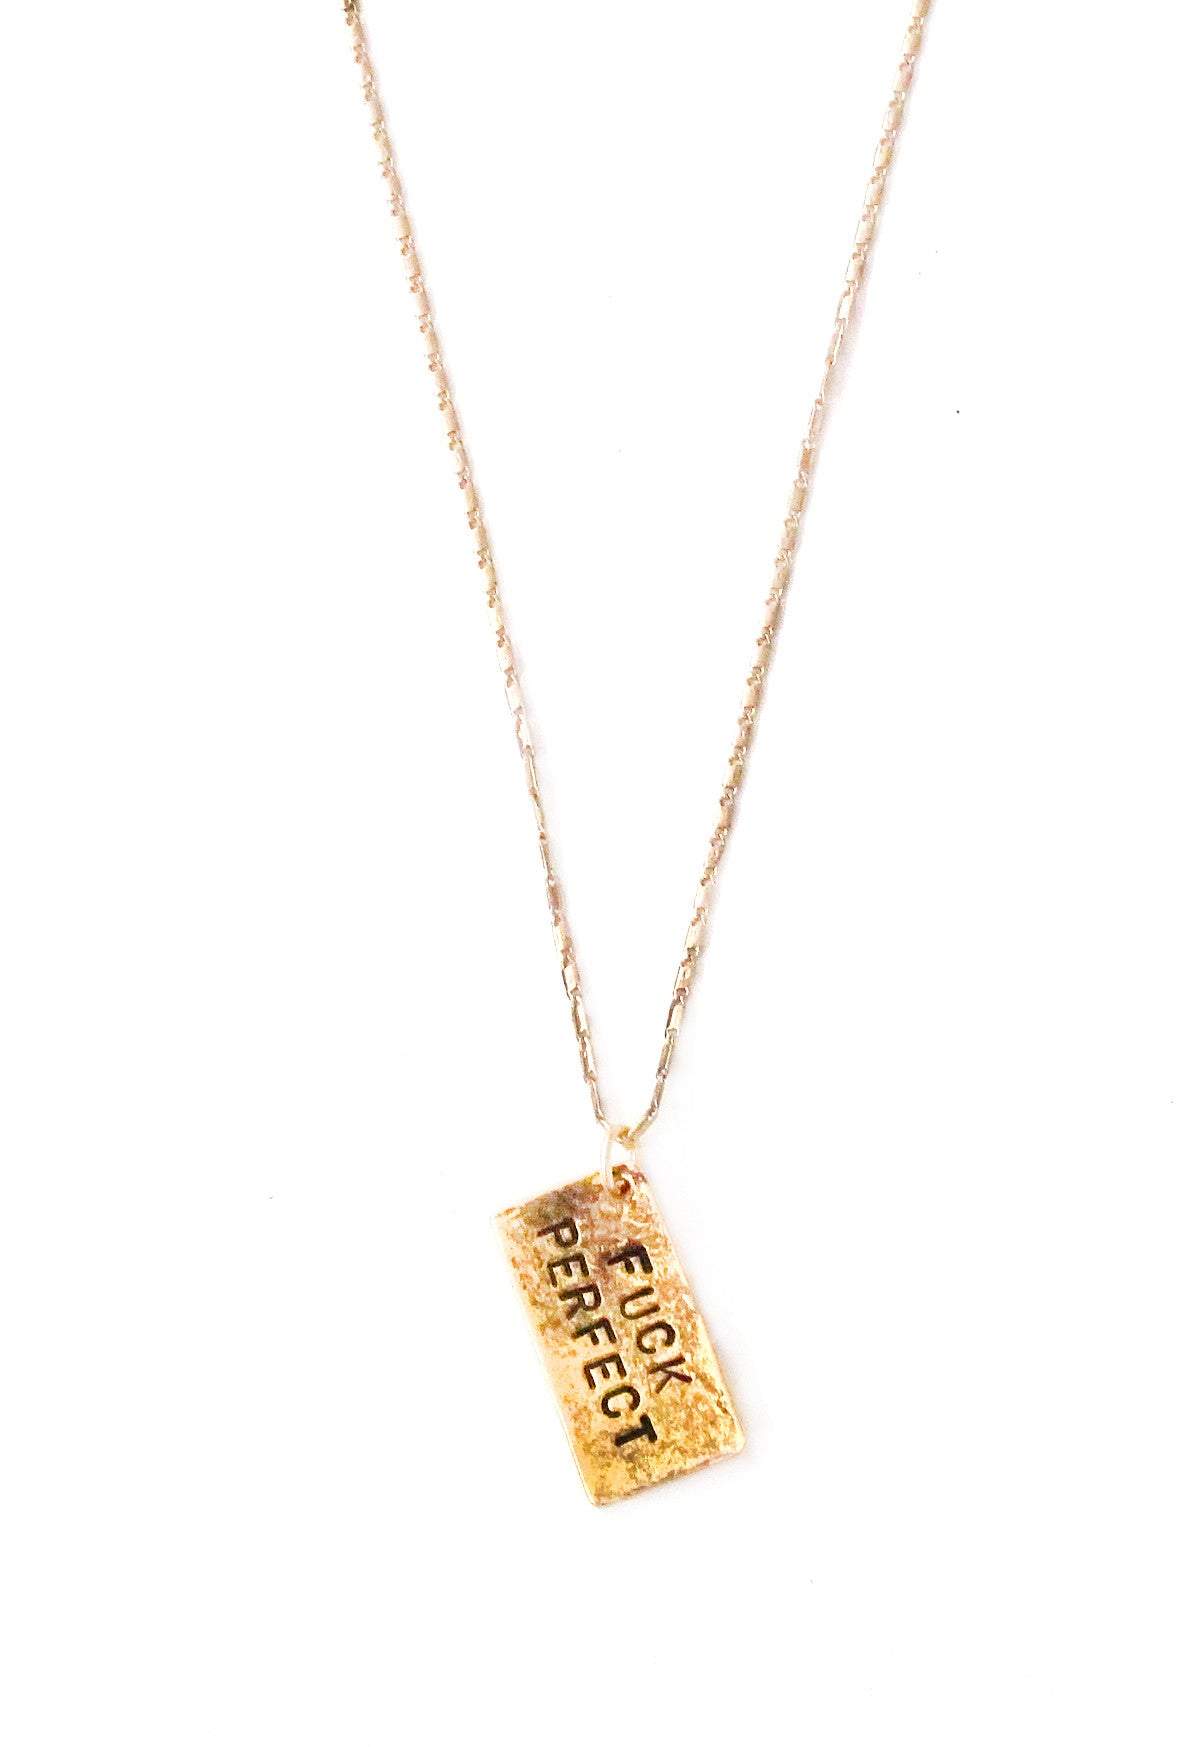 Fu*k Perfect Hand Stamped Necklace